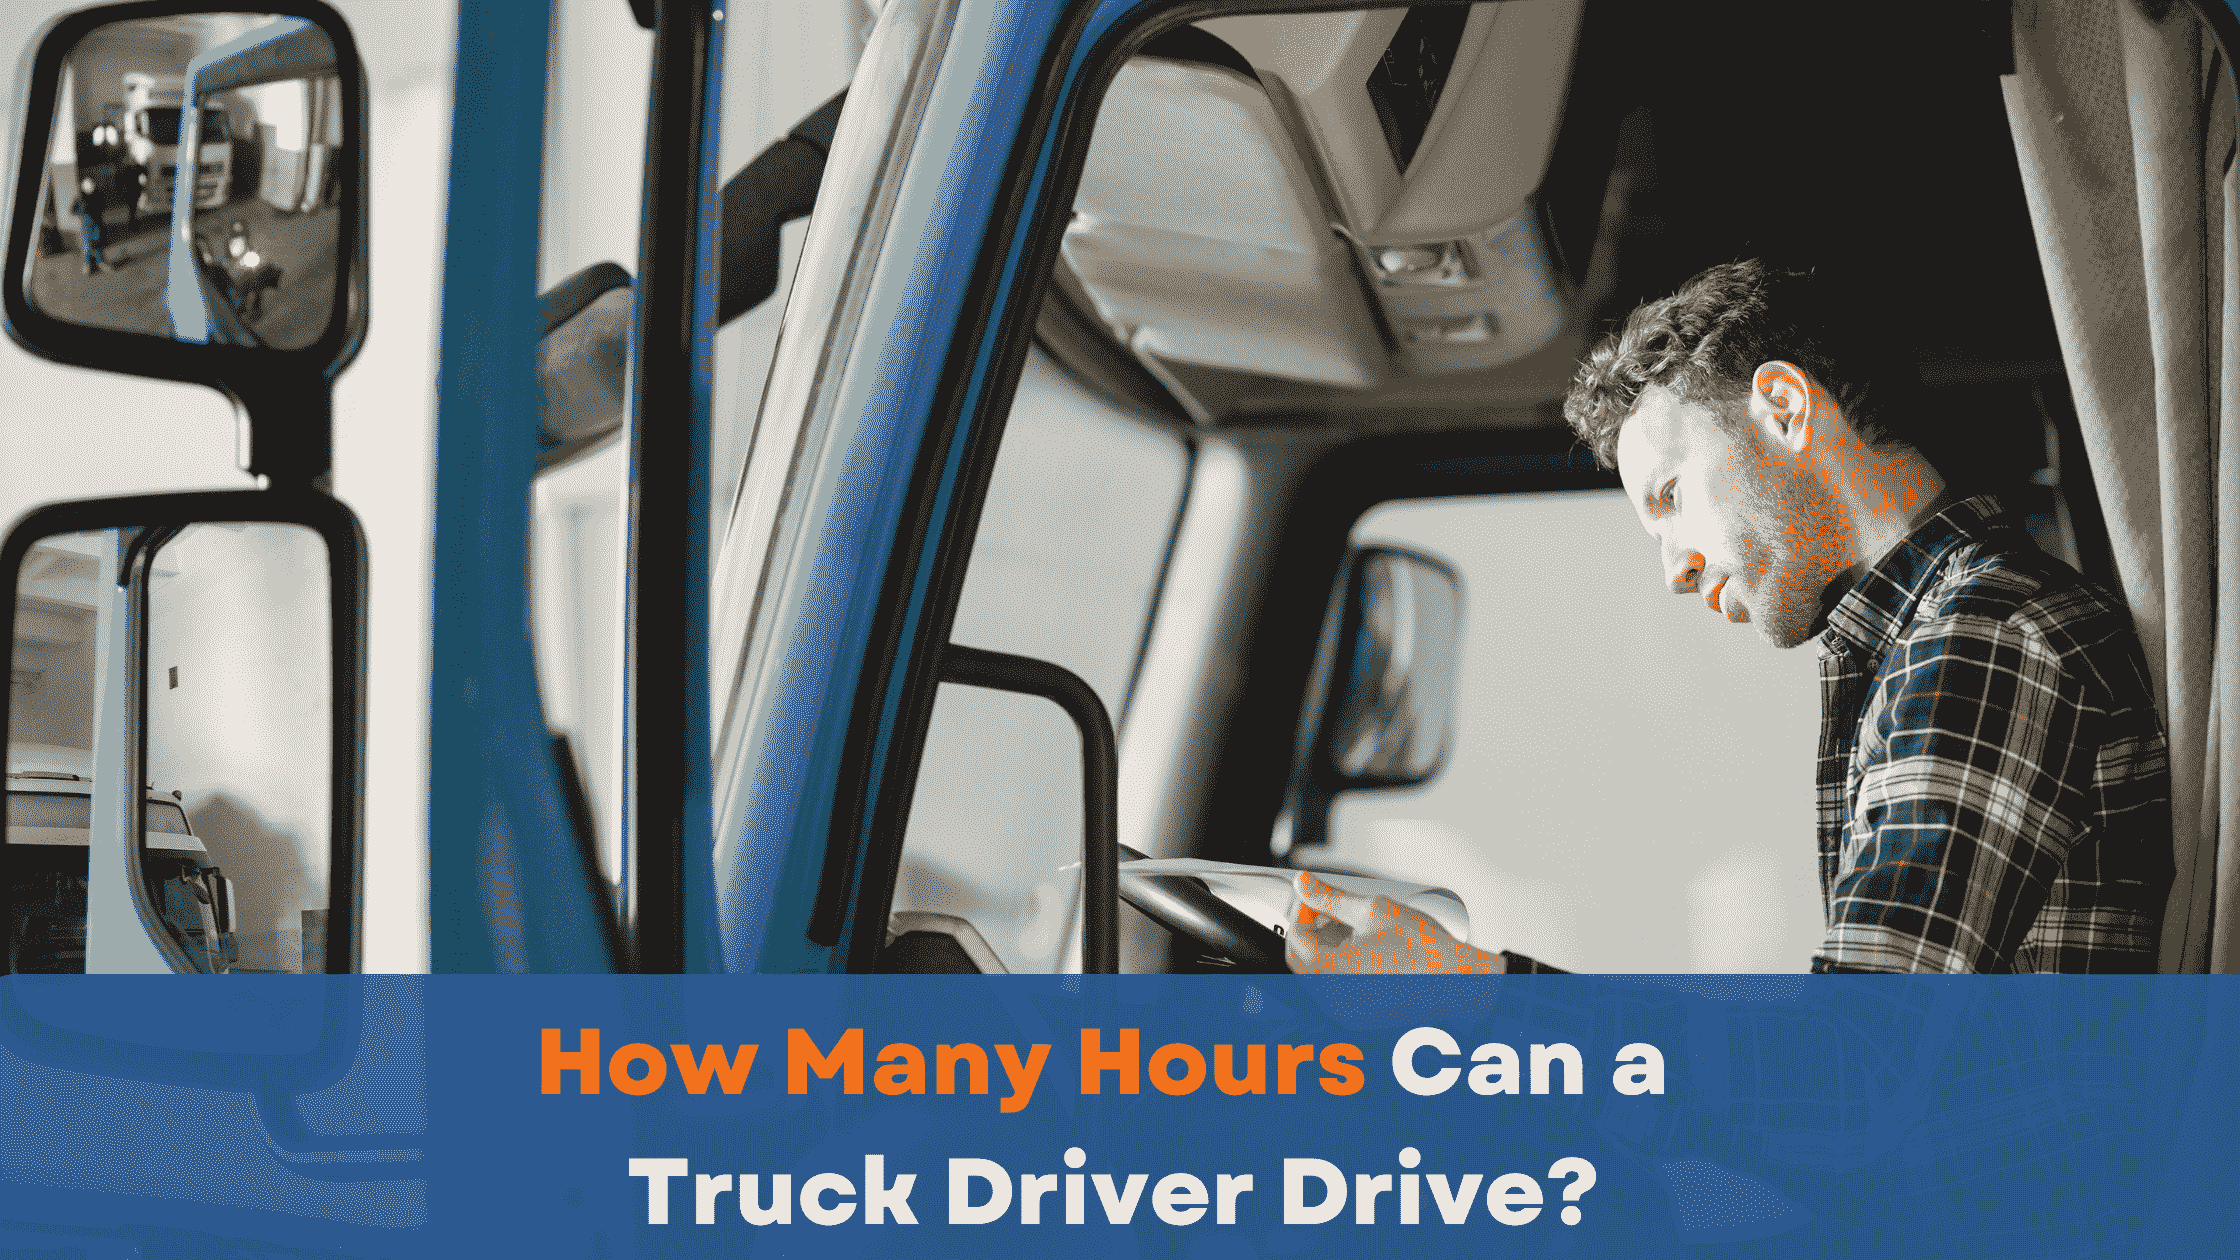 How Many Hours Can a Truck Driver Drive a CMV?